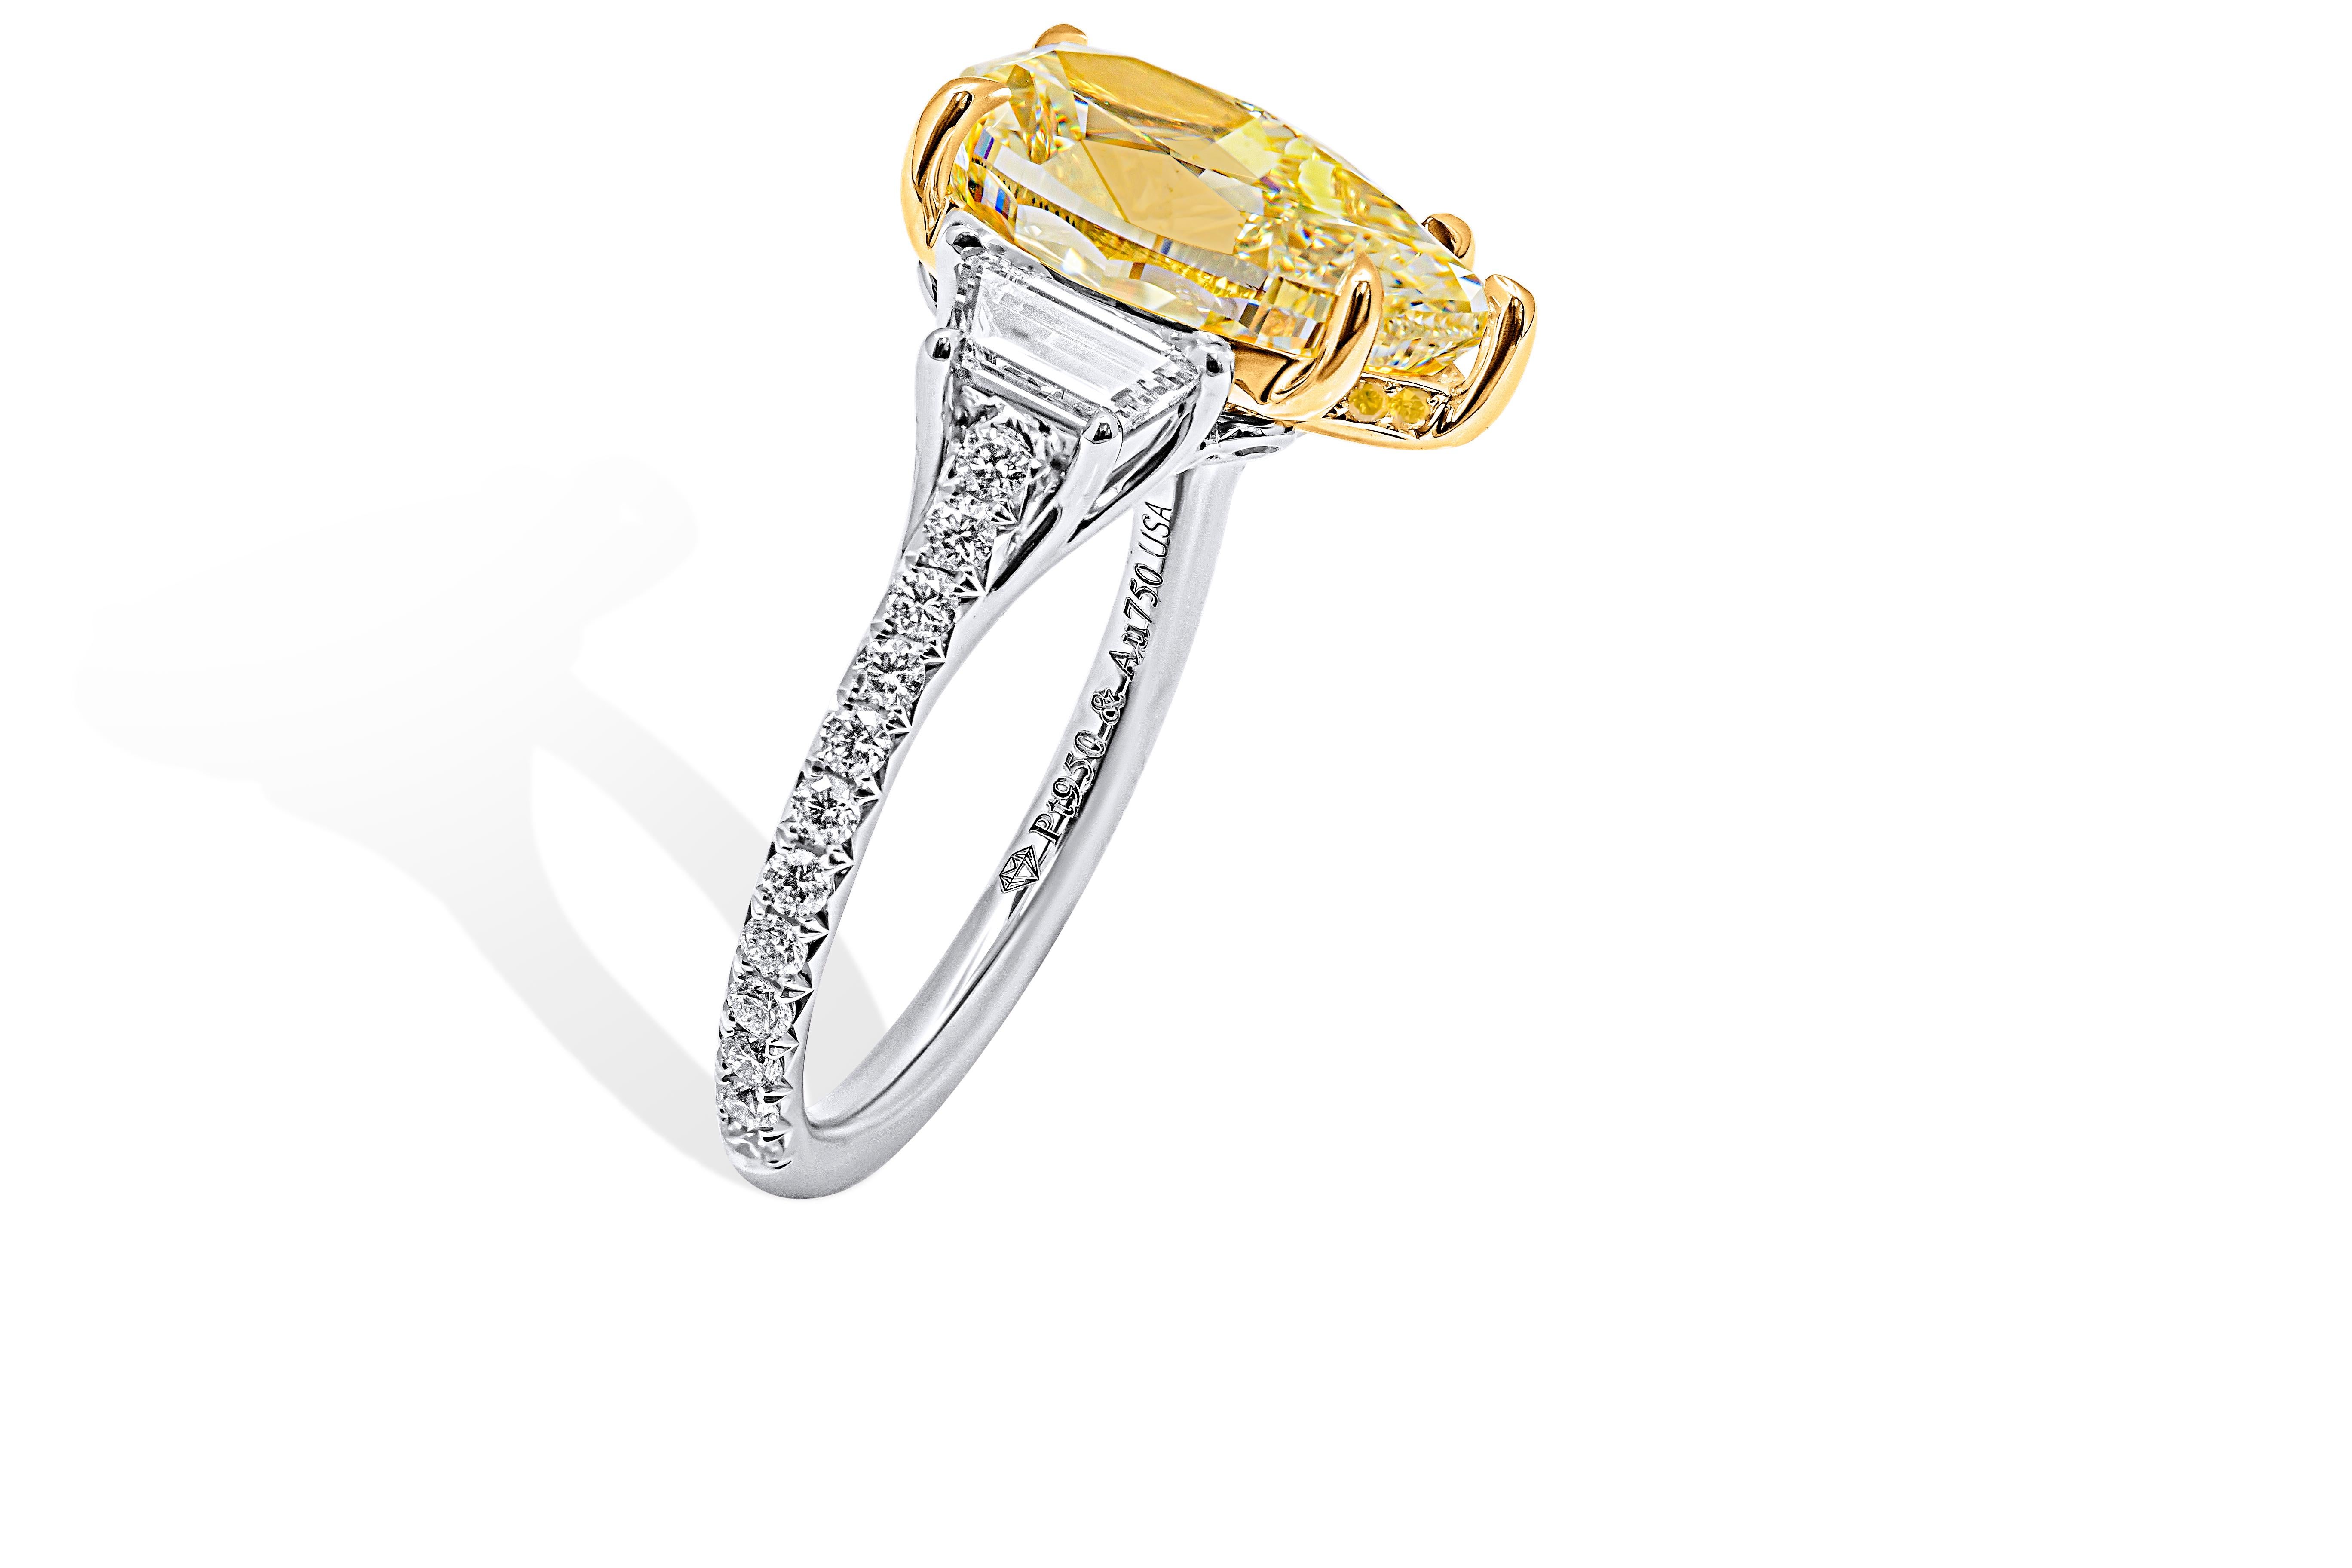 ntroducing our exquisite 3 Stone Ring in 950 Platinum and 18k Yellow Gold, a true testament to timeless elegance and sophistication. This magnificent ring boasts a stunning 5.02-carat Natural Fancy Light Yellow Even VS2 Pear Shape Diamond at its